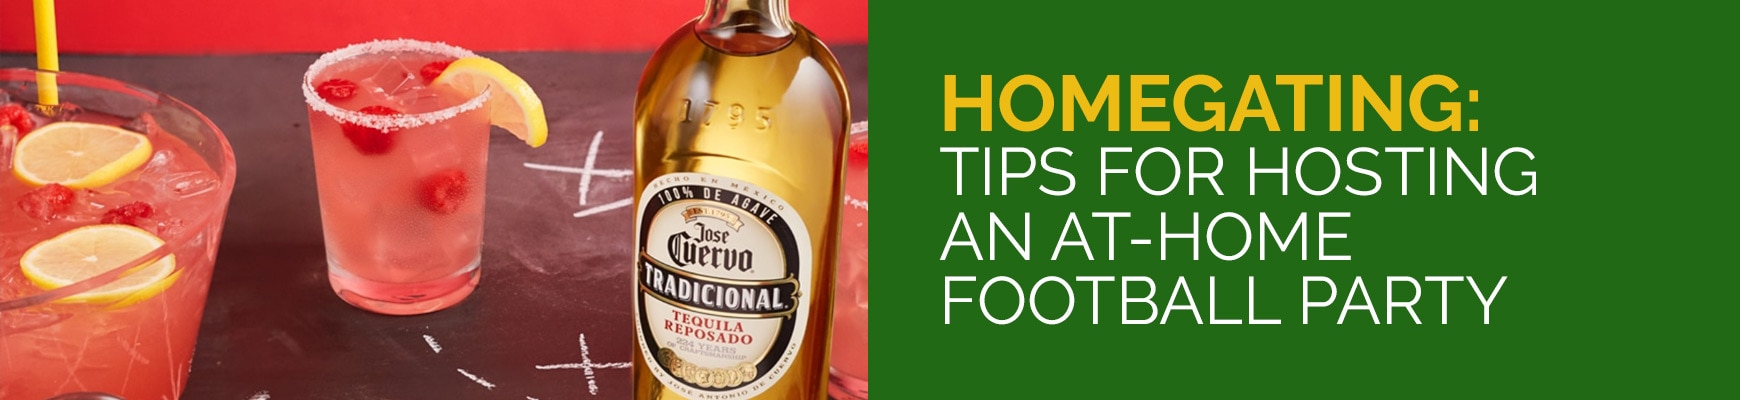 Homegating: Tips for Hosting an At-Home Football Party